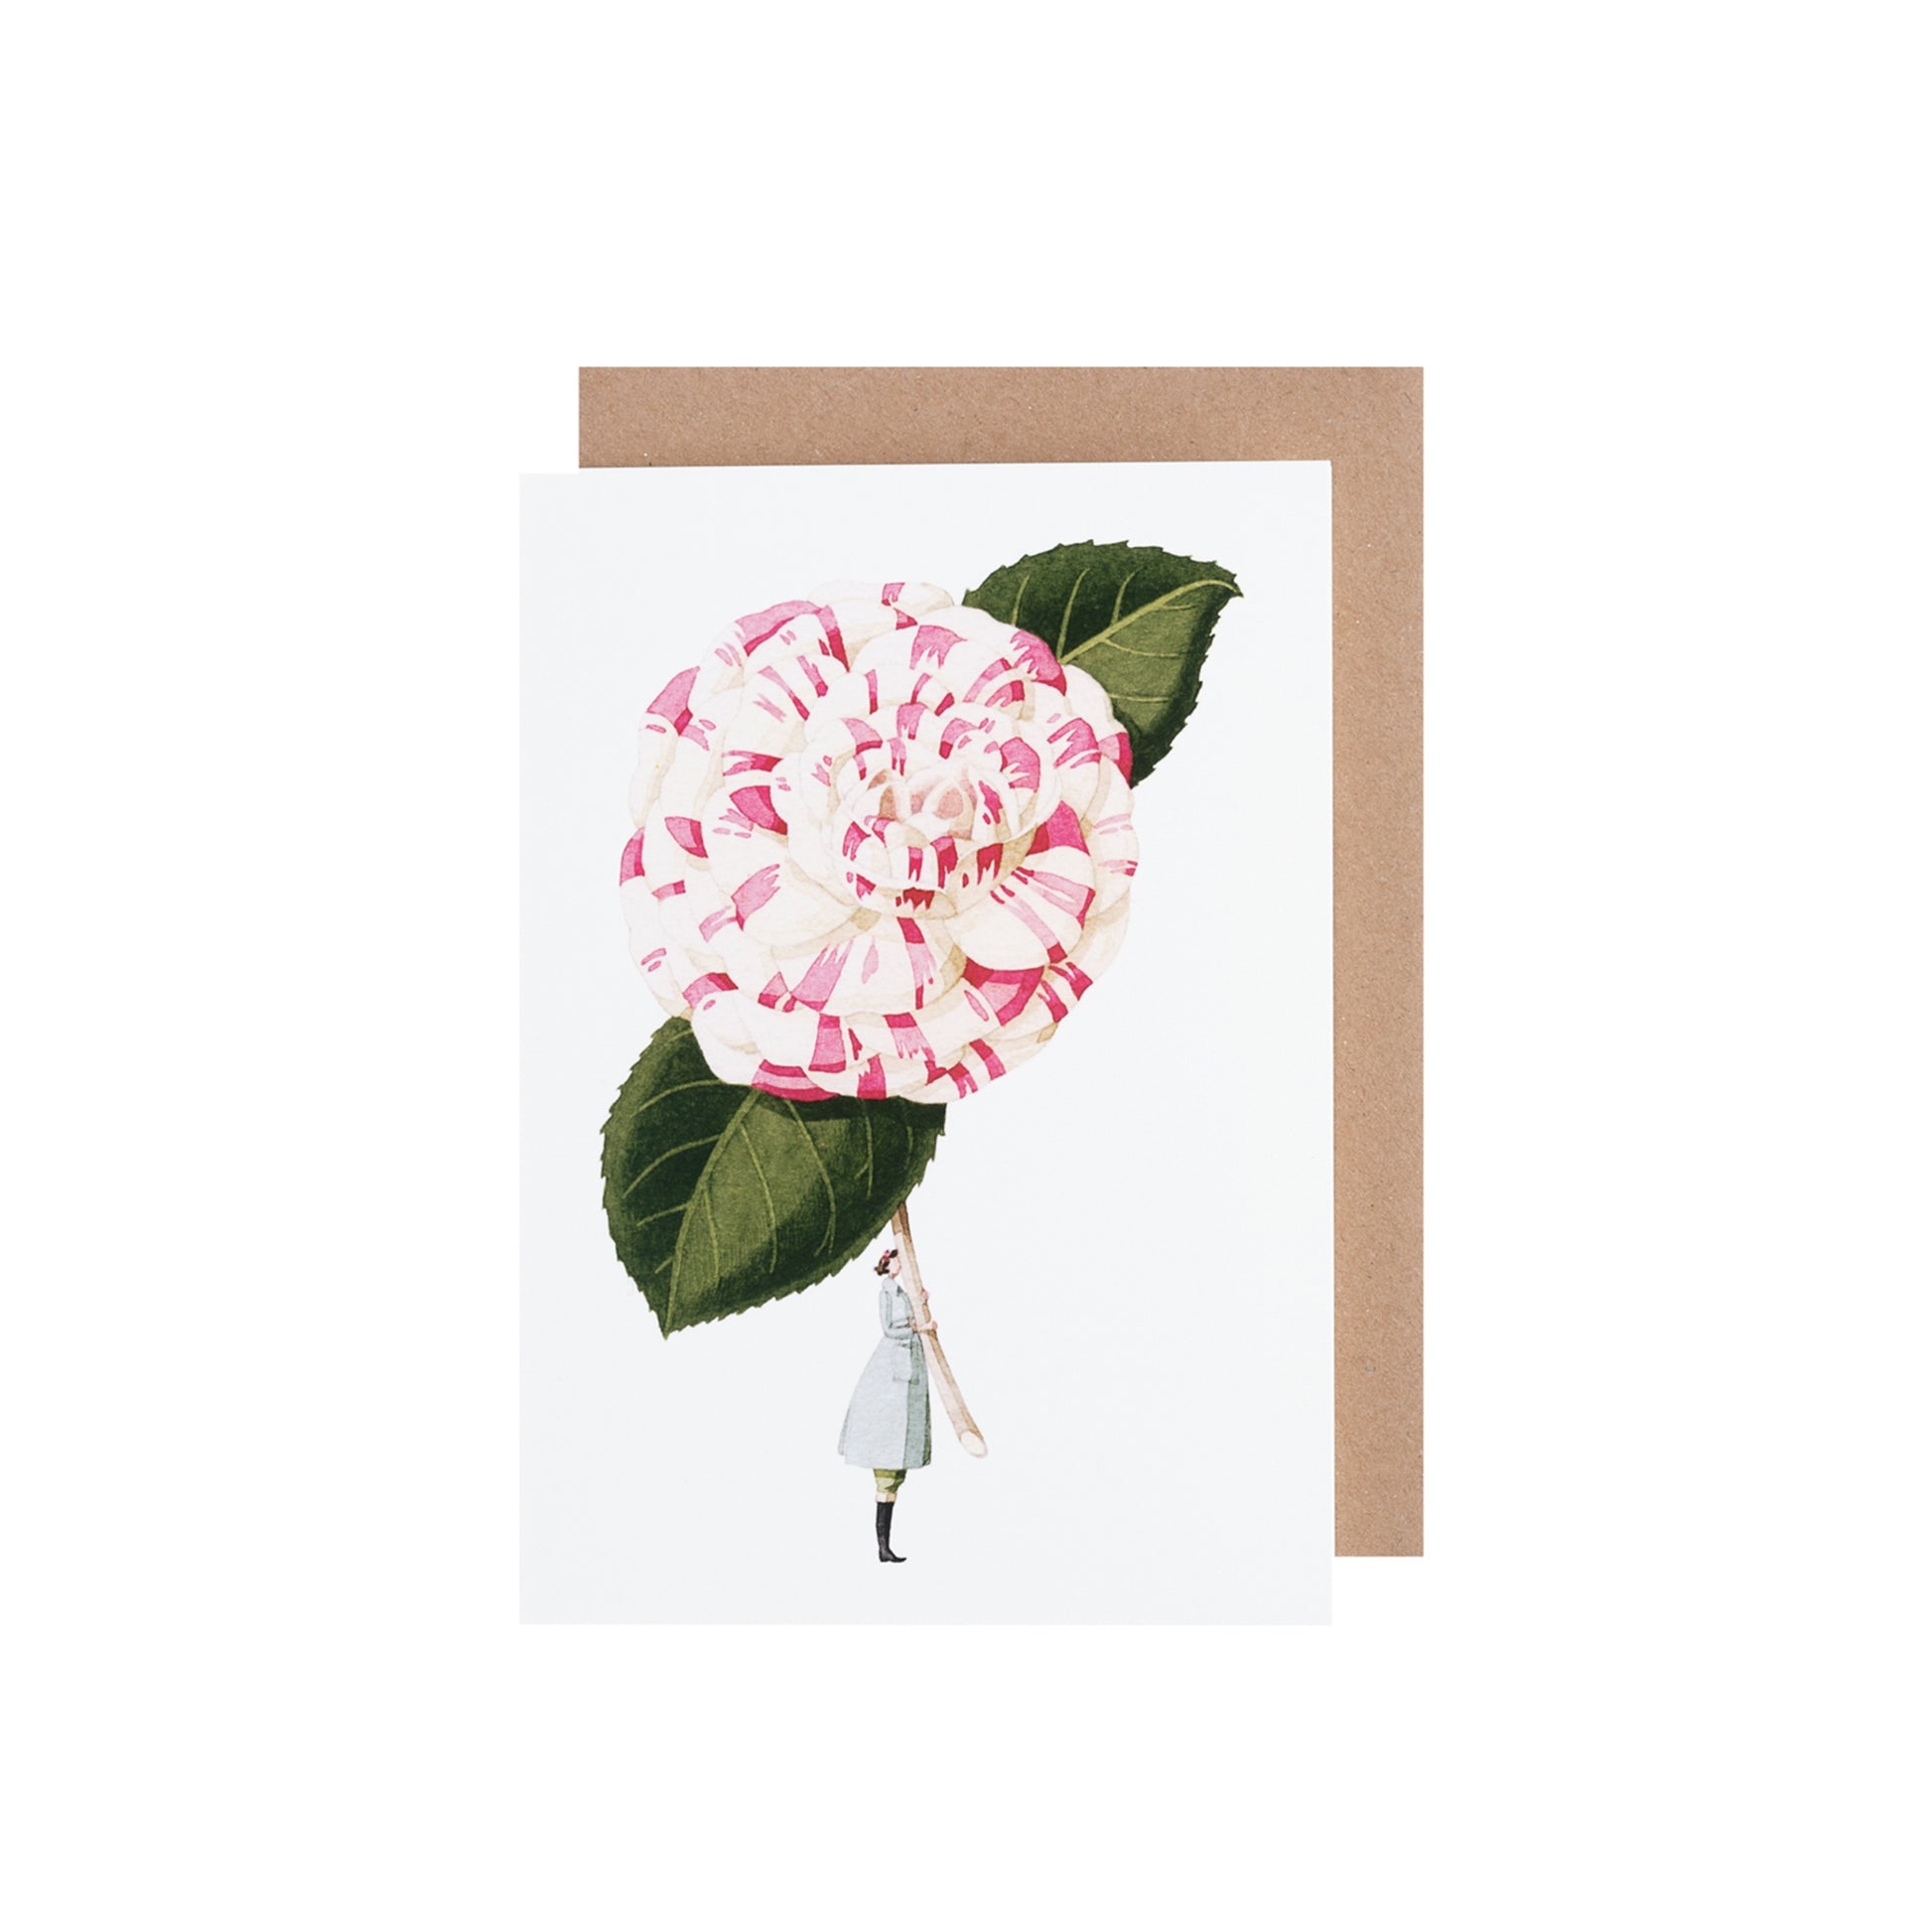 An Image of the greeting card "Camellia" in pastels showing a pink and white camellia.